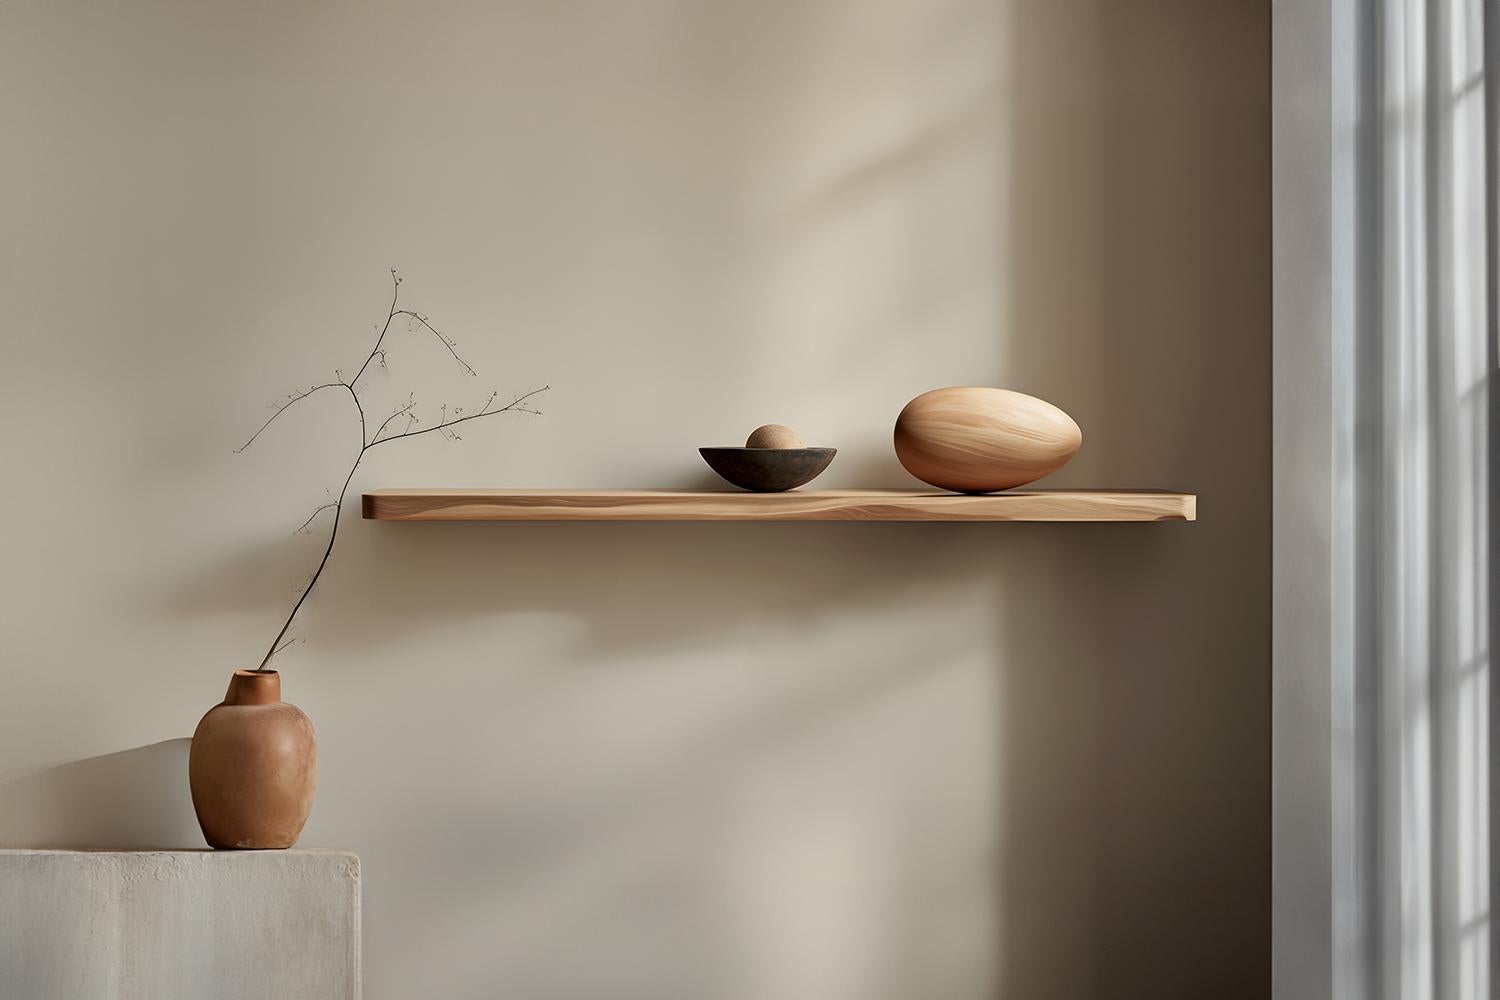 Individual Floating Shelf with One Sculptural Wooden Pebble Accent, Sereno by Joel Escalona

—

What happens when the practical becomes art?
What happens when ornamentation gains significance?

Those were the questions Joel Escalona asked